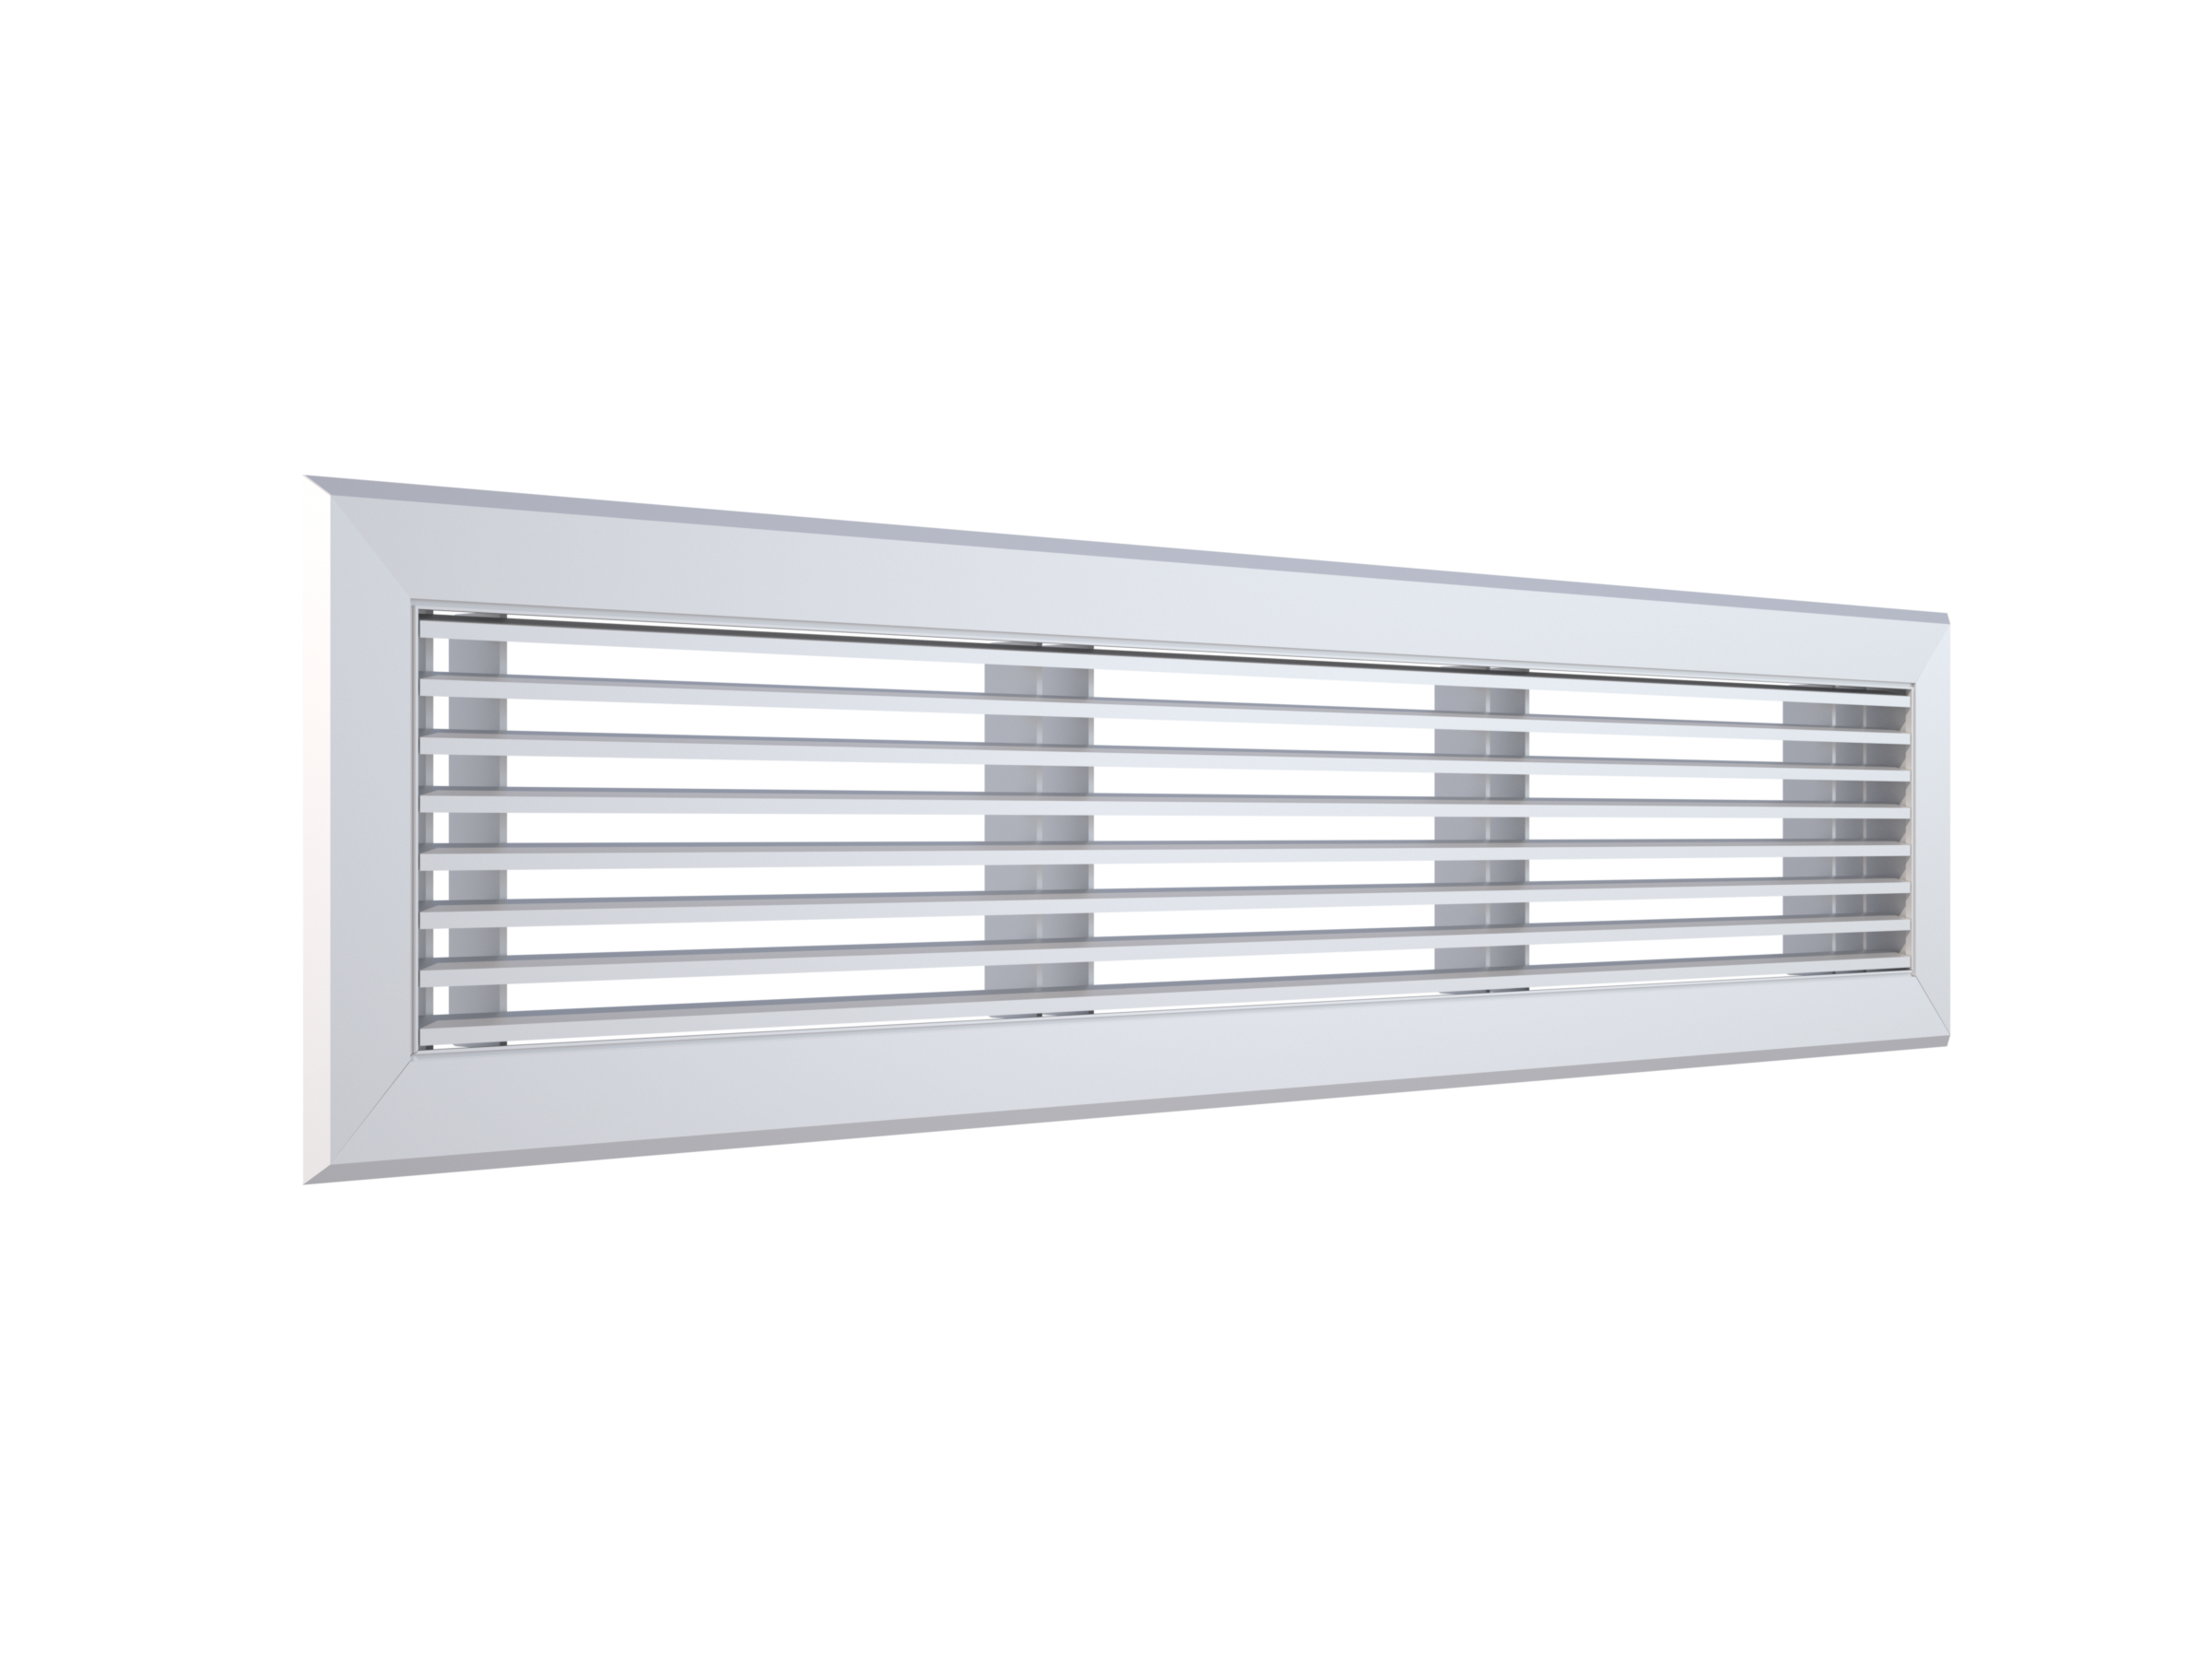 Holyoake LDHF-1215 Linear Bar Floor Grille with 15-degree air discharge and 12mm blade spacing